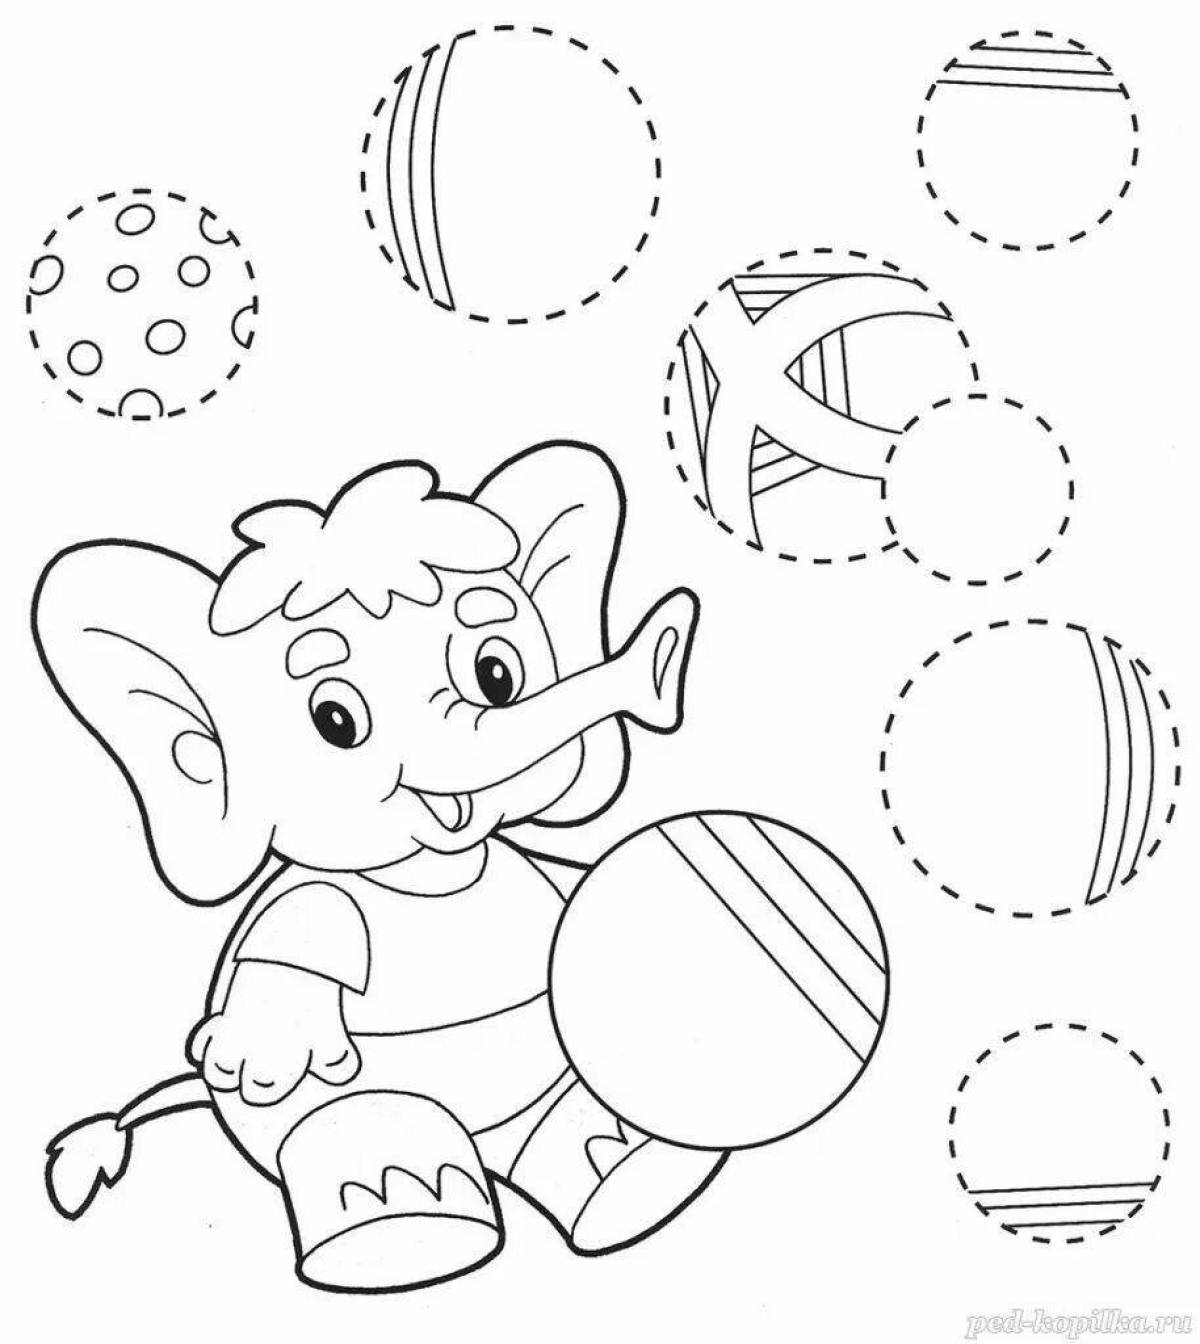 Fun coloring book for 2 year olds